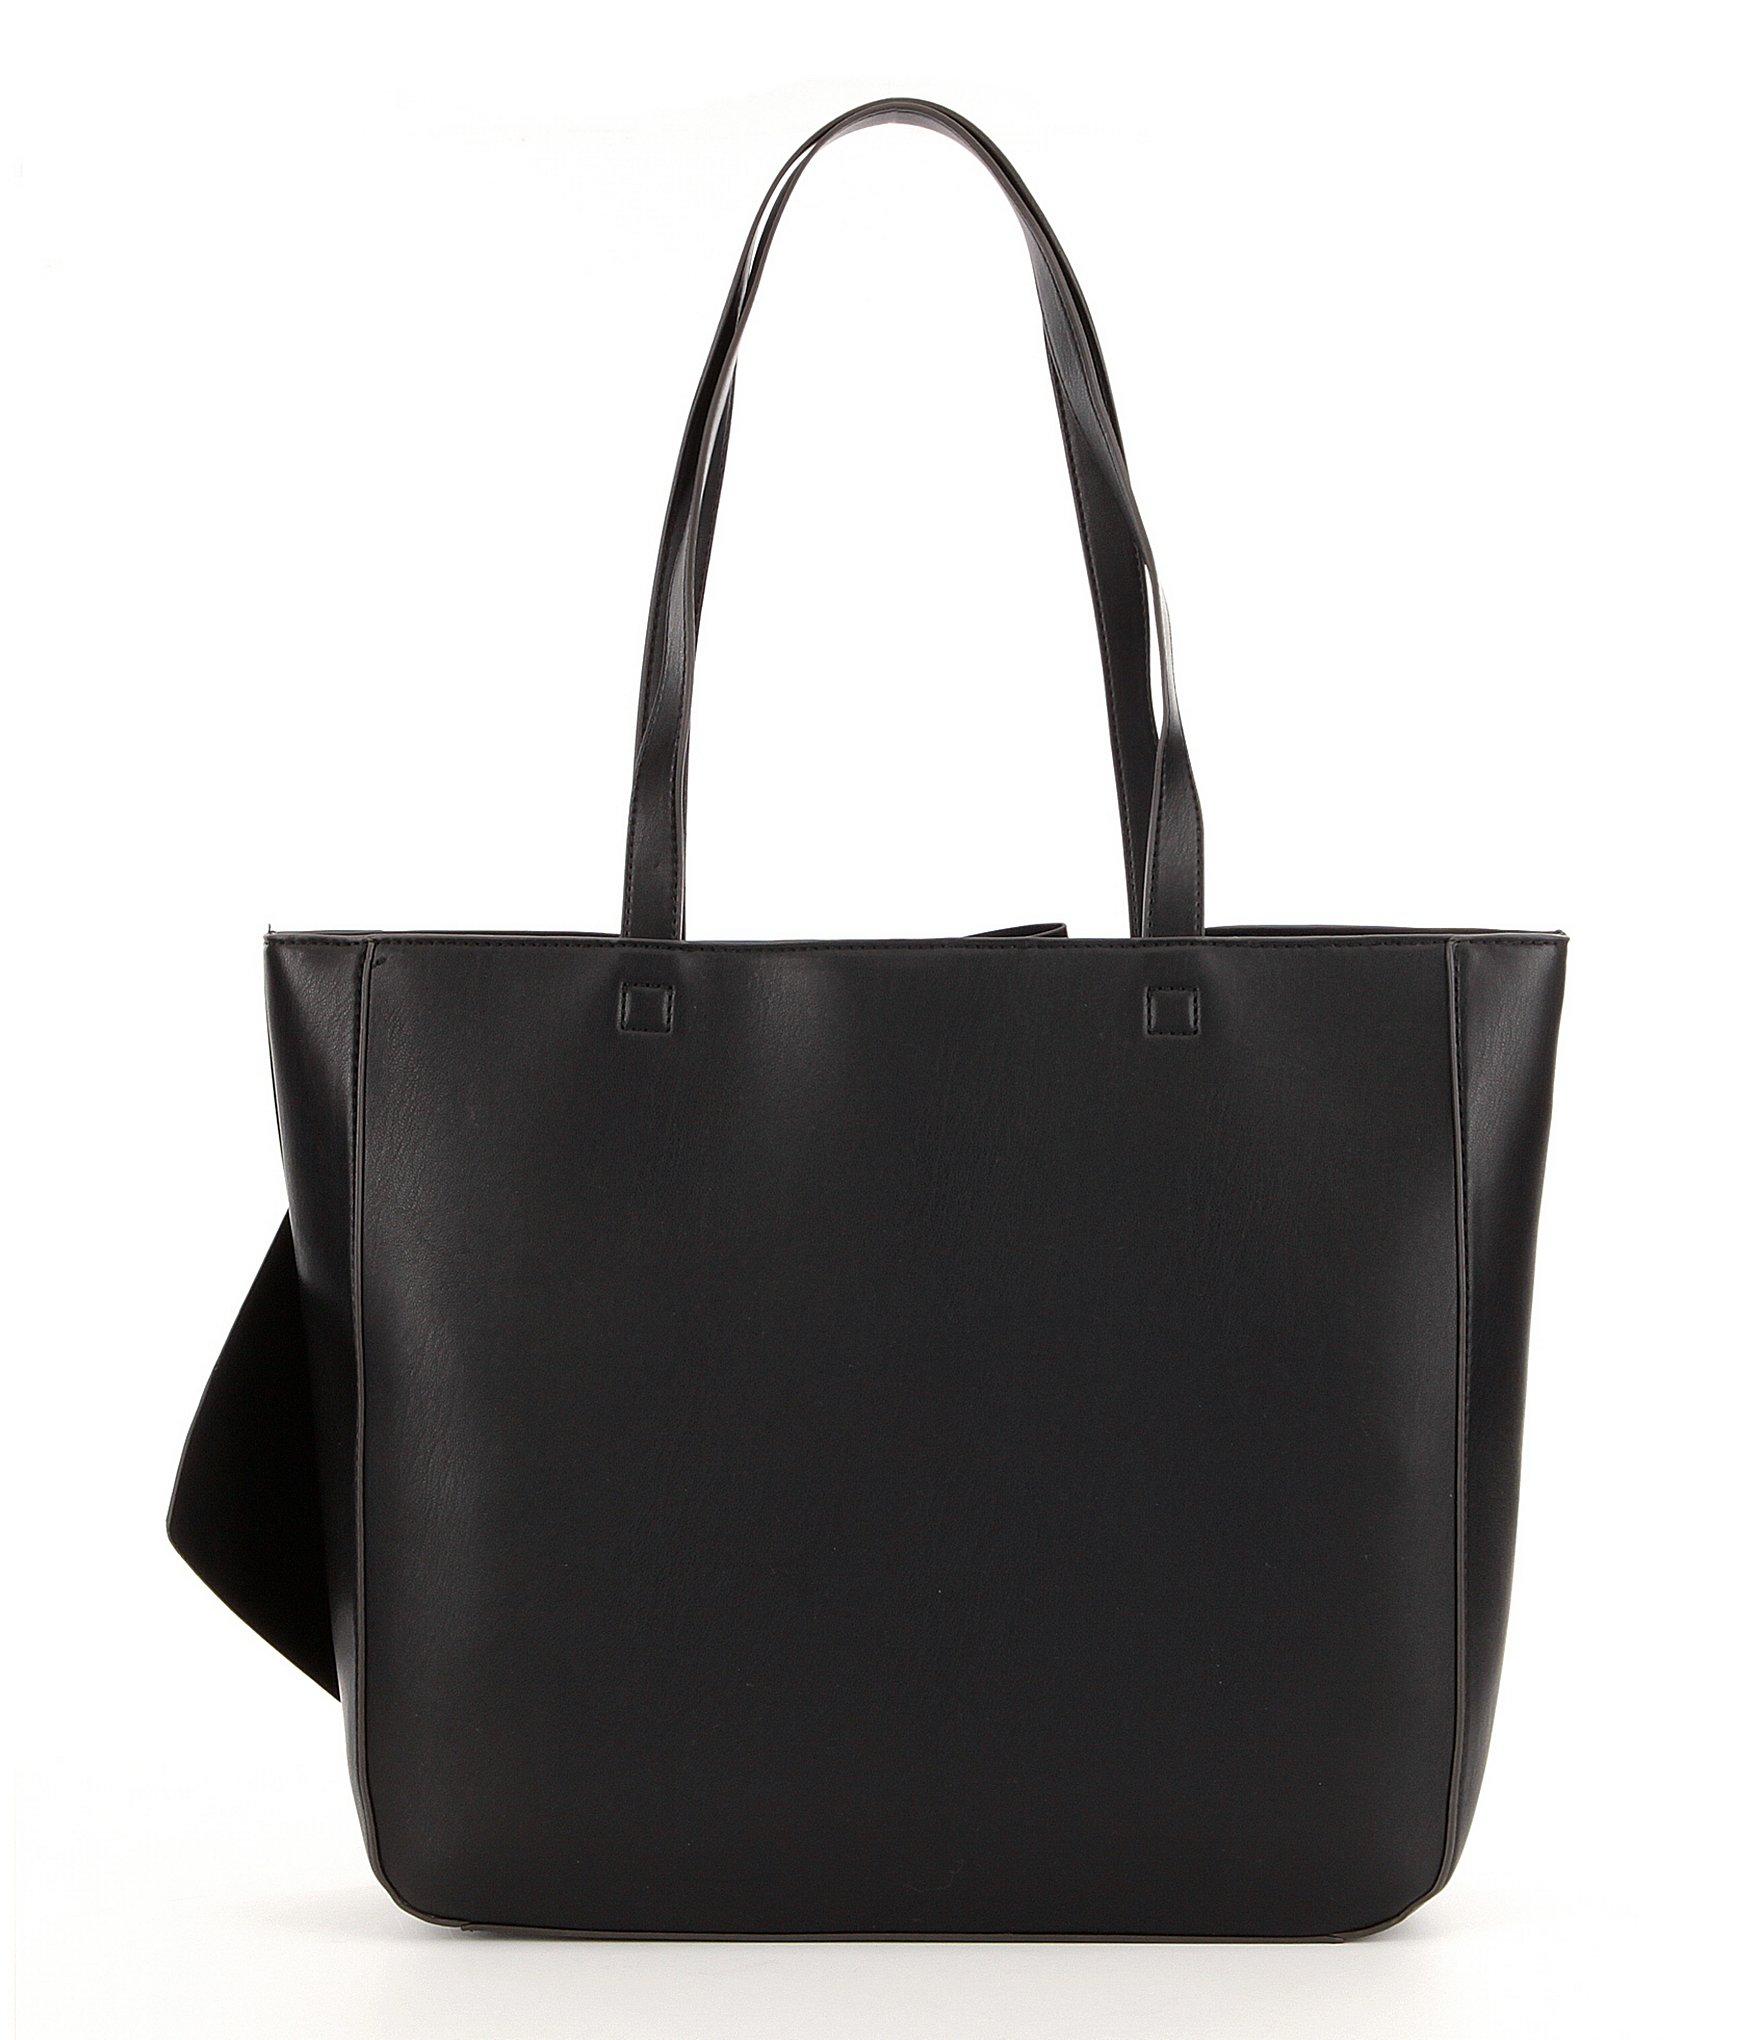 Karl Lagerfeld Fara Bow Faux-leather Tote in Black - Lyst